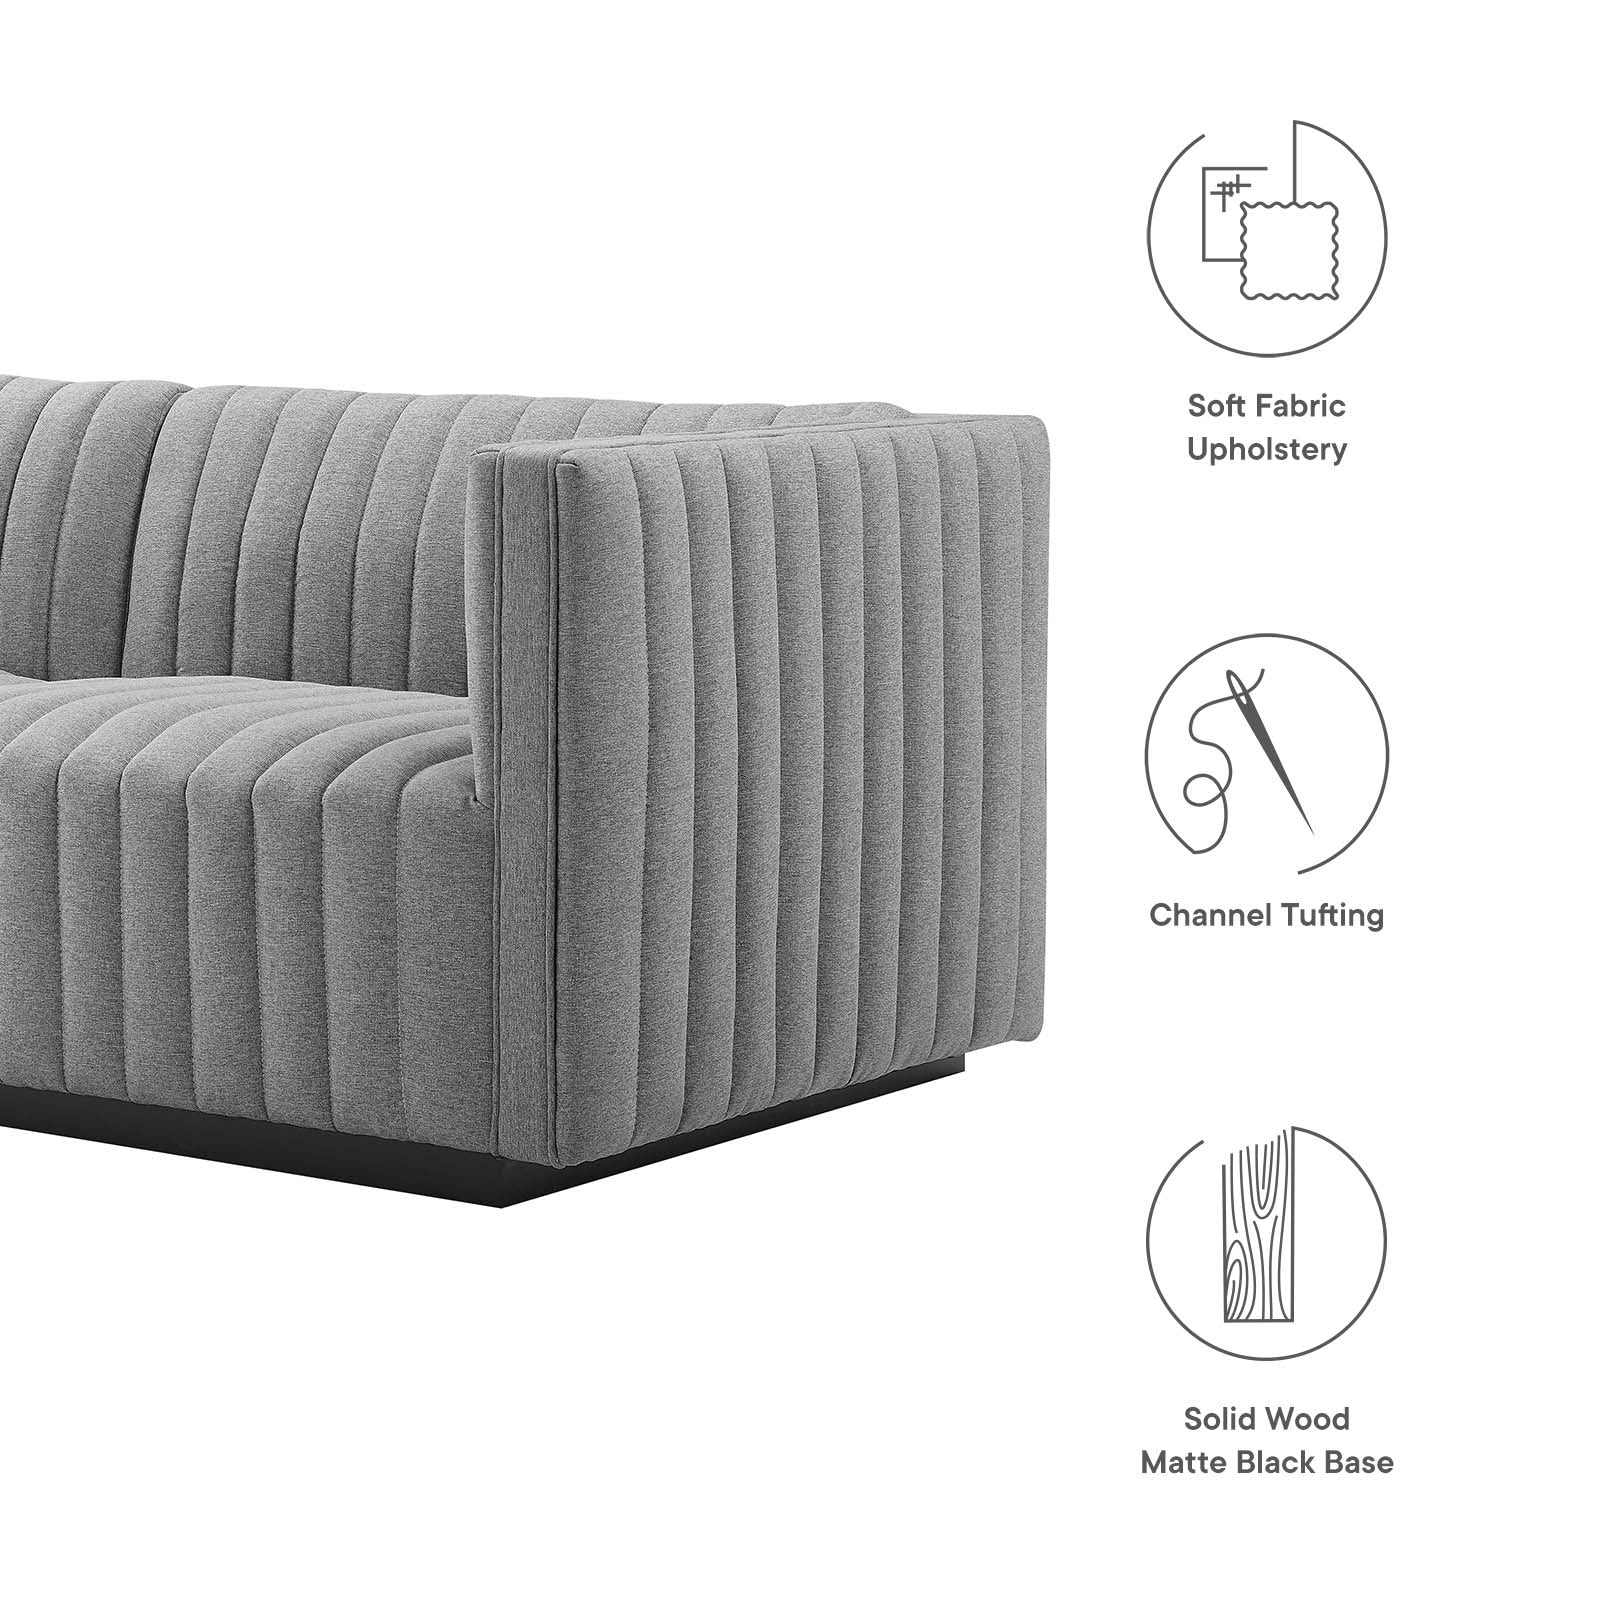 Modway Sectional Sofas - Conjure Channel Tufted Upholstered Fabric 4-Piece Sectional Sofa Black Light Gray